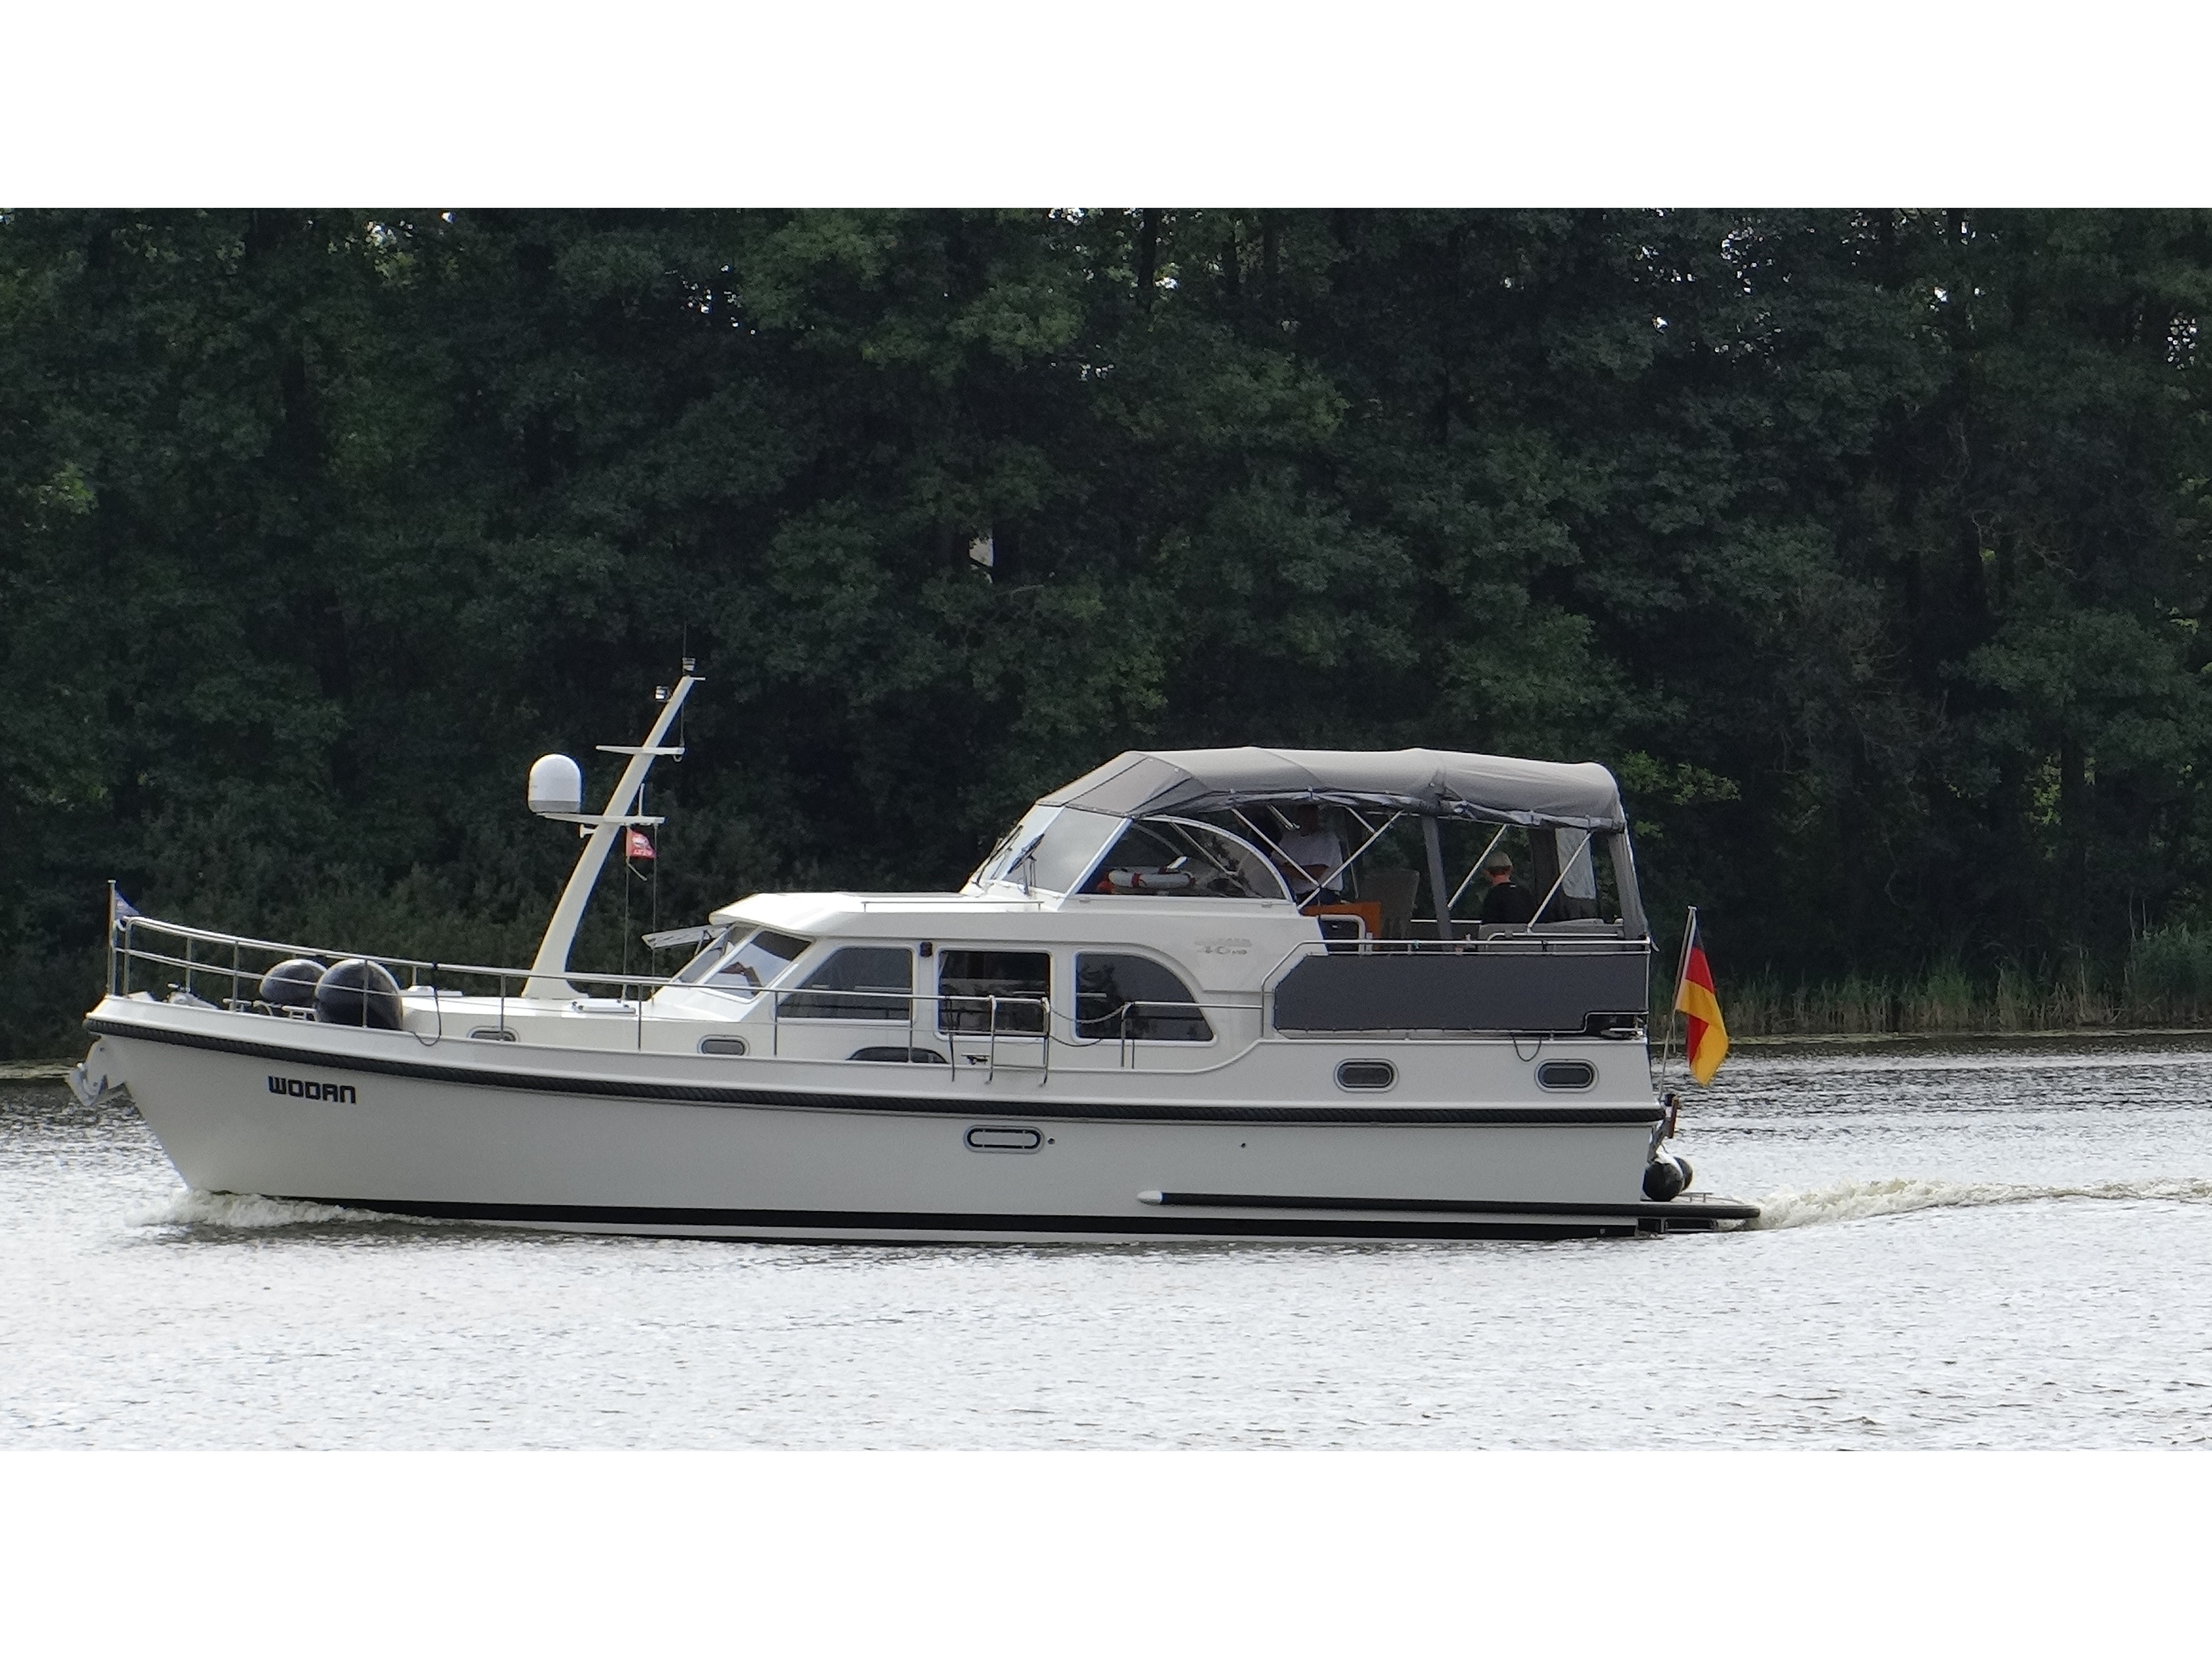 Linssen Grand Sturdy 40.9 AC - Motor Boat Charter Germany & Boat hire in Germany Mirow Jachthafen Mirow 2